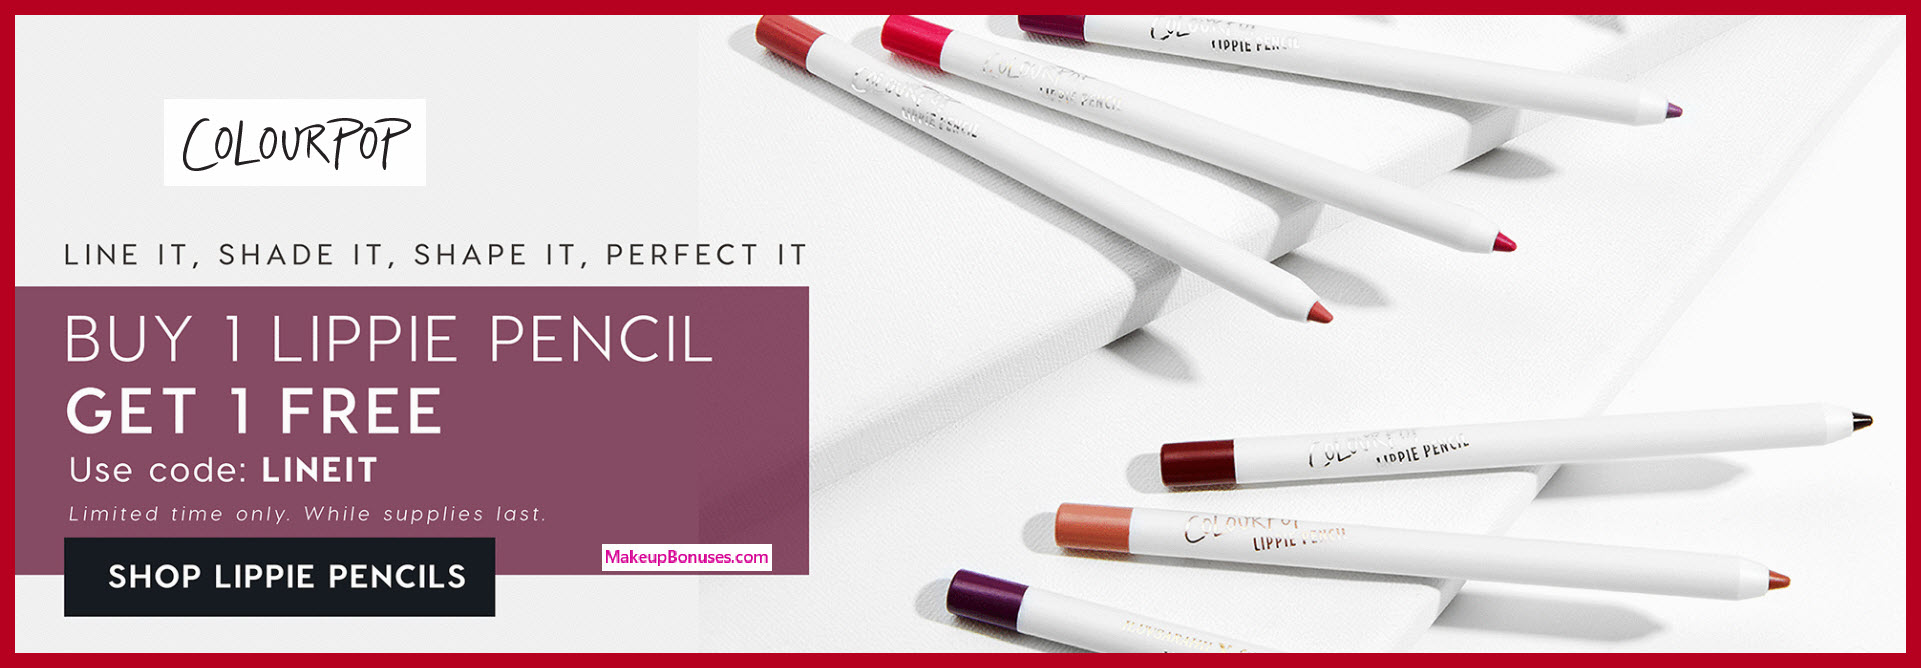 Receive a free 5-pc gift with 5 lippie pencils purchase